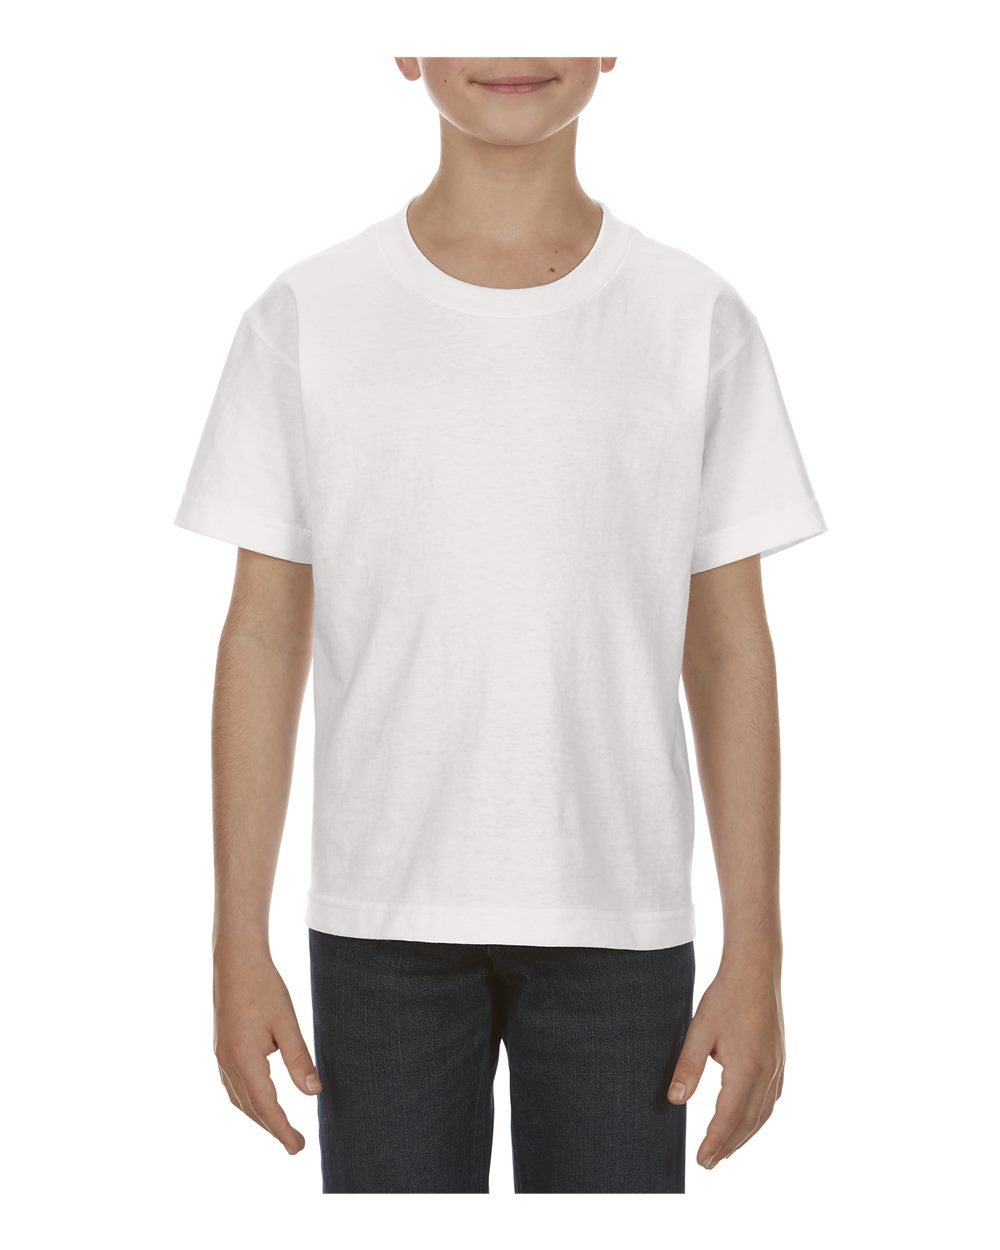 Alstyle 3381 - Classic Youth Tee